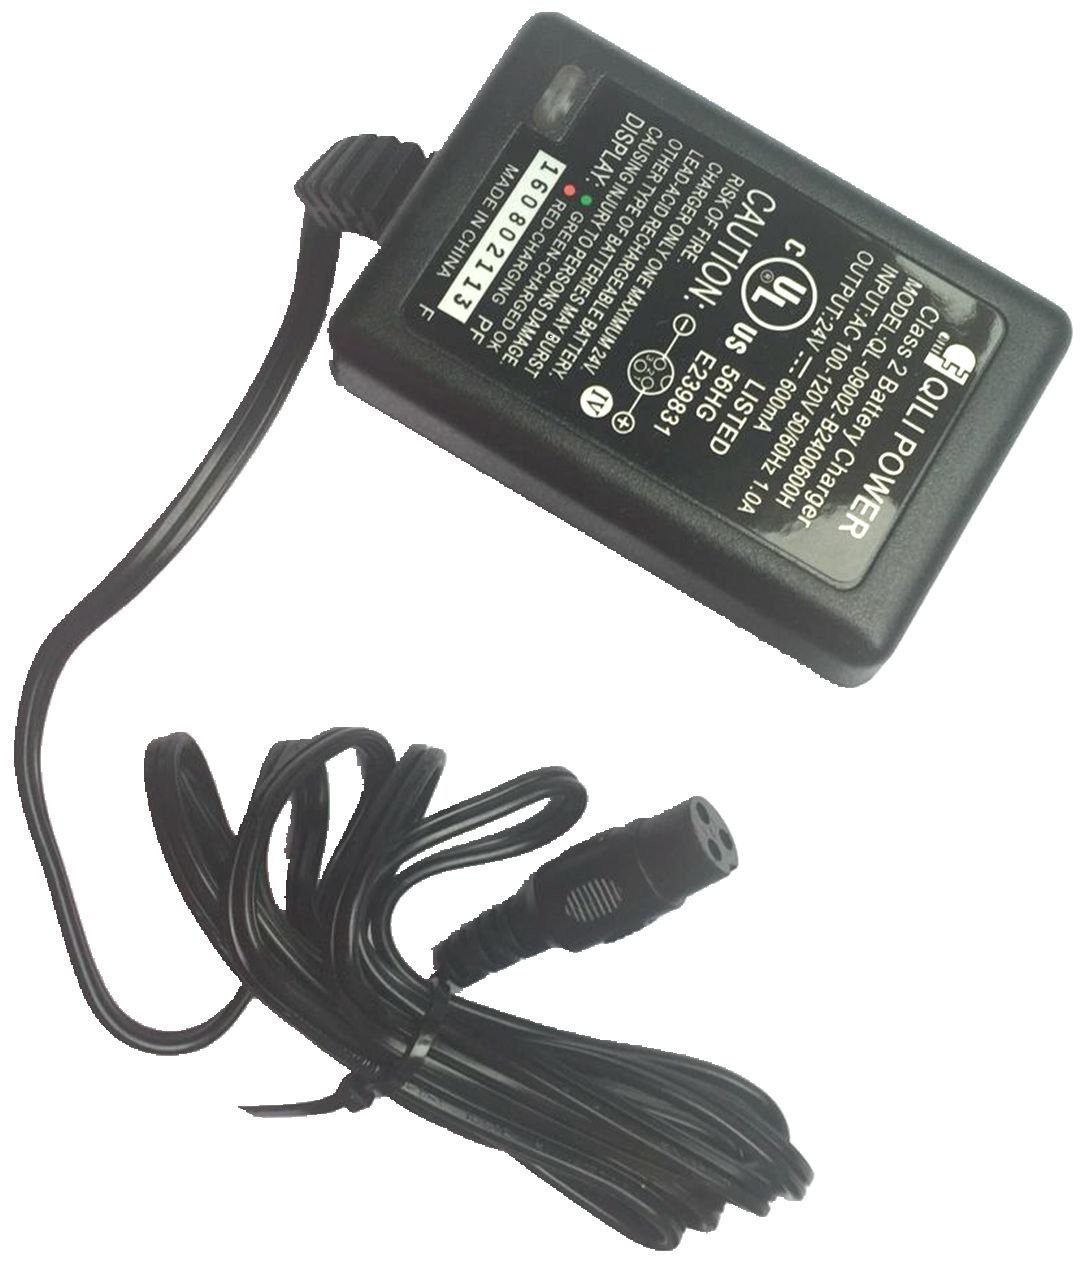 Razor Electric Scooter Battery Charger For the e100 e125 e150 Amazon Sports & Outdoors